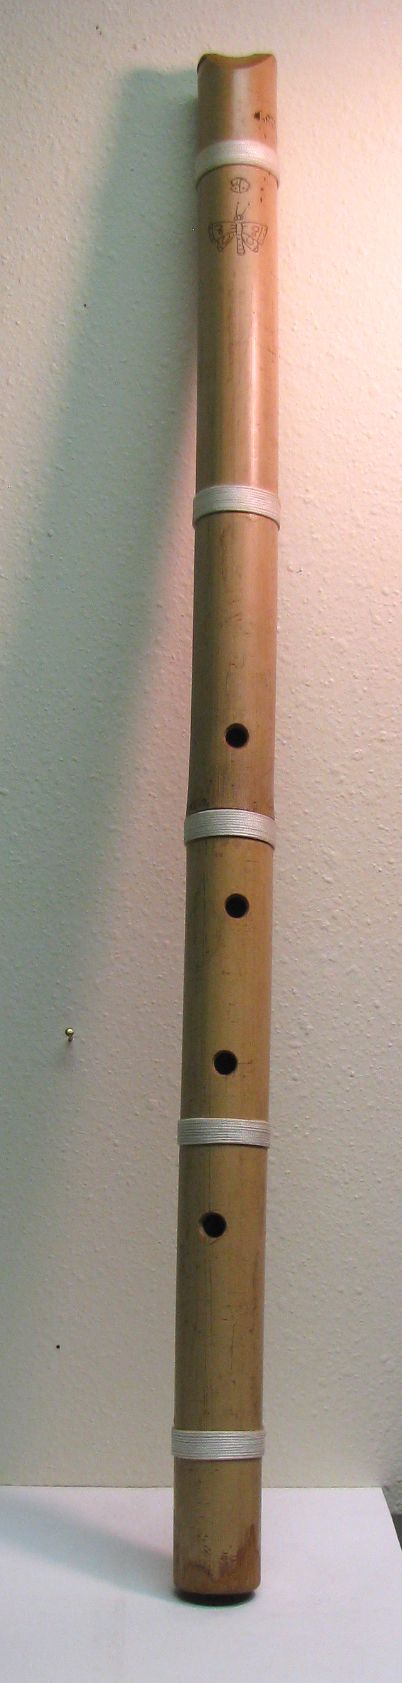 Used for meditational purposes this flute has white bindings and  Butteryfly wood burned near the mouthpiece.
$40.00